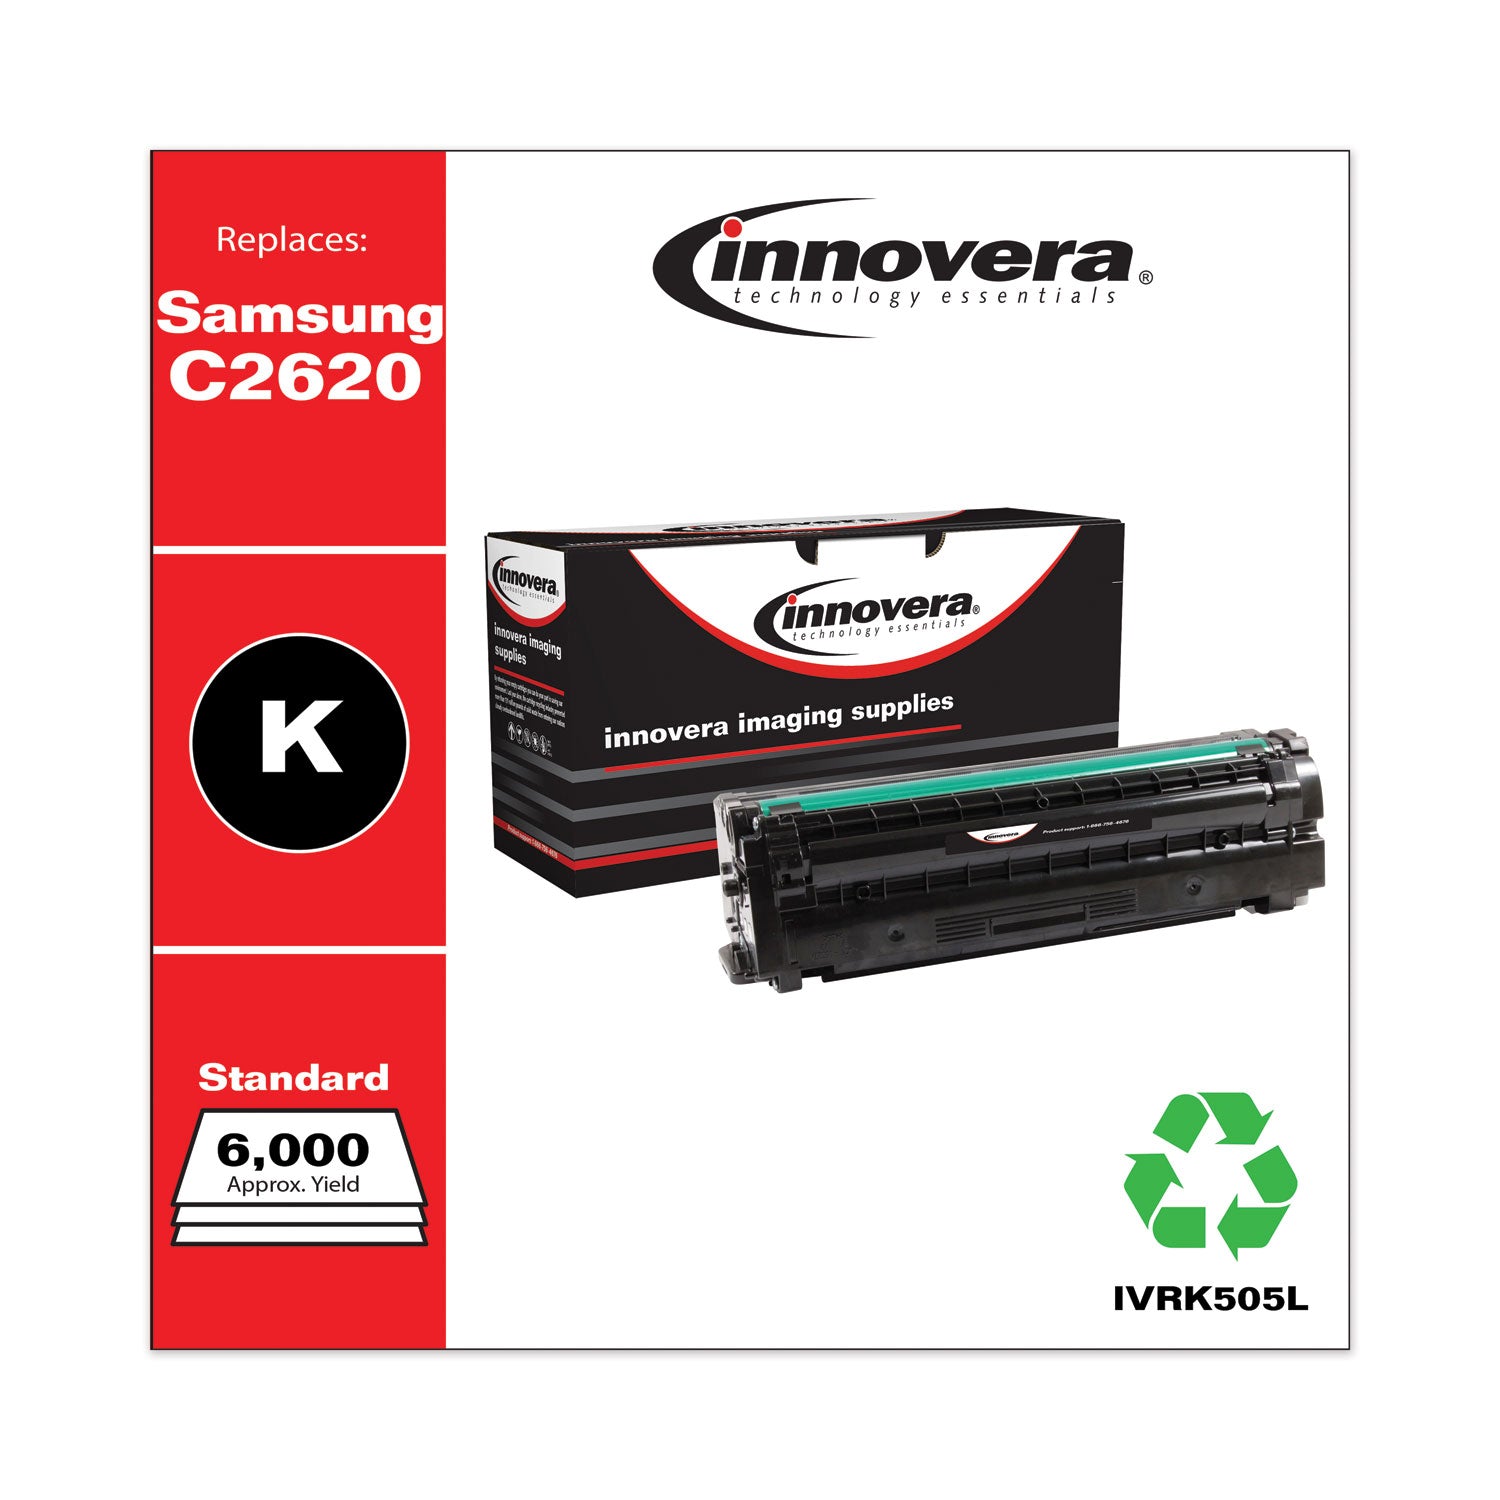 remanufactured-black-toner-replacement-for-c2620-6000-page-yield_ivrk505l - 2